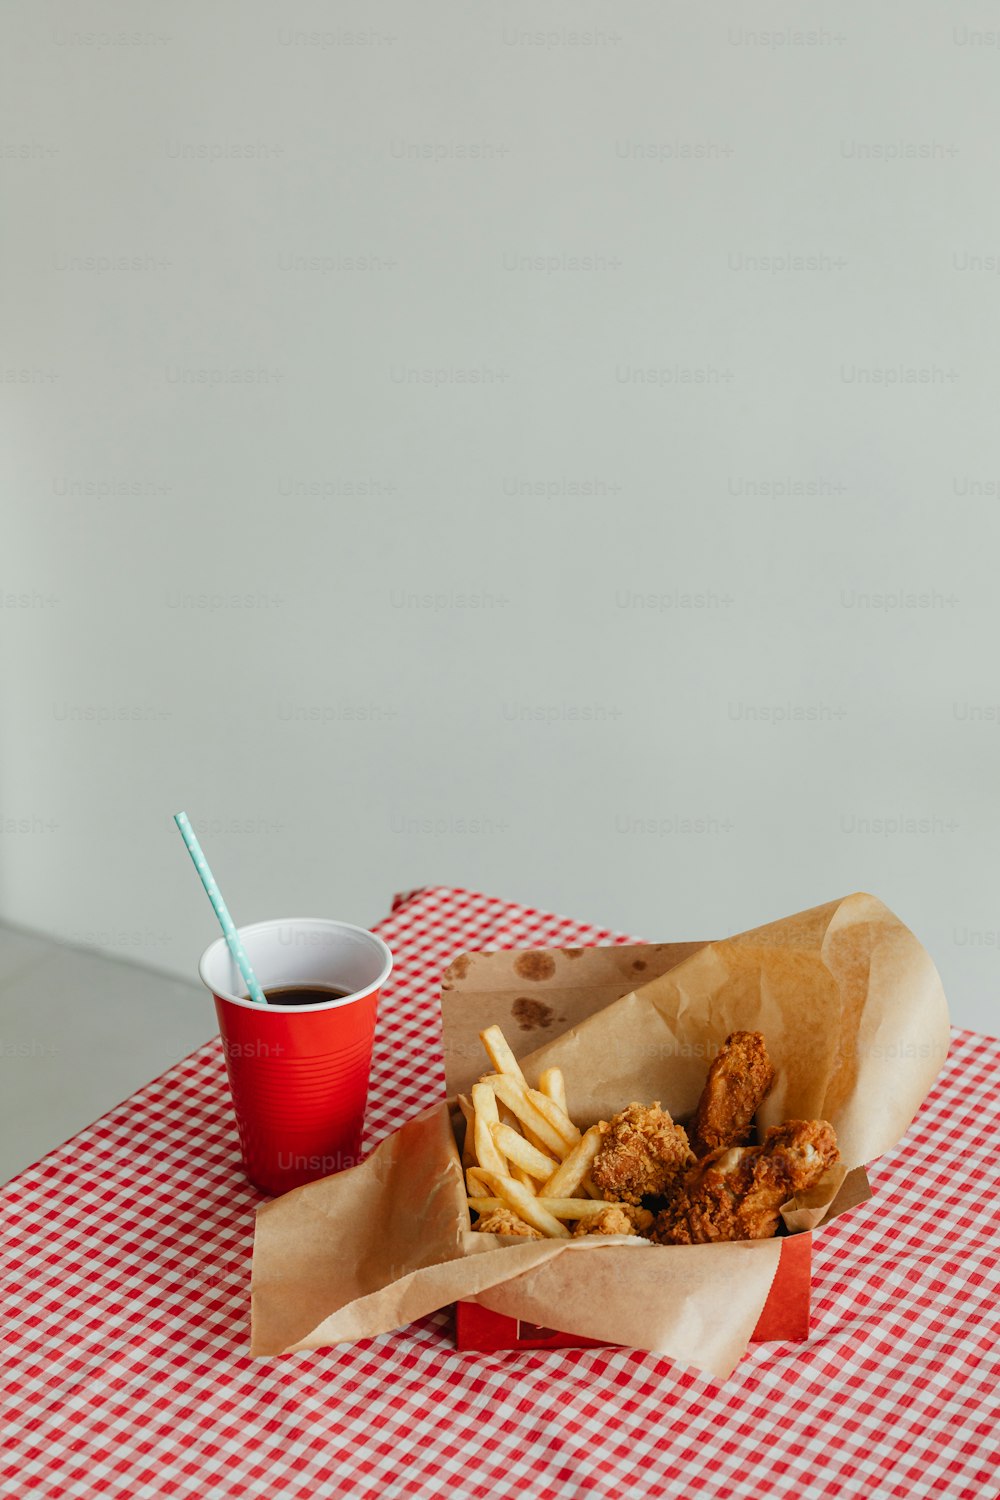 a red and white checkered table with a basket of fries and a cup of